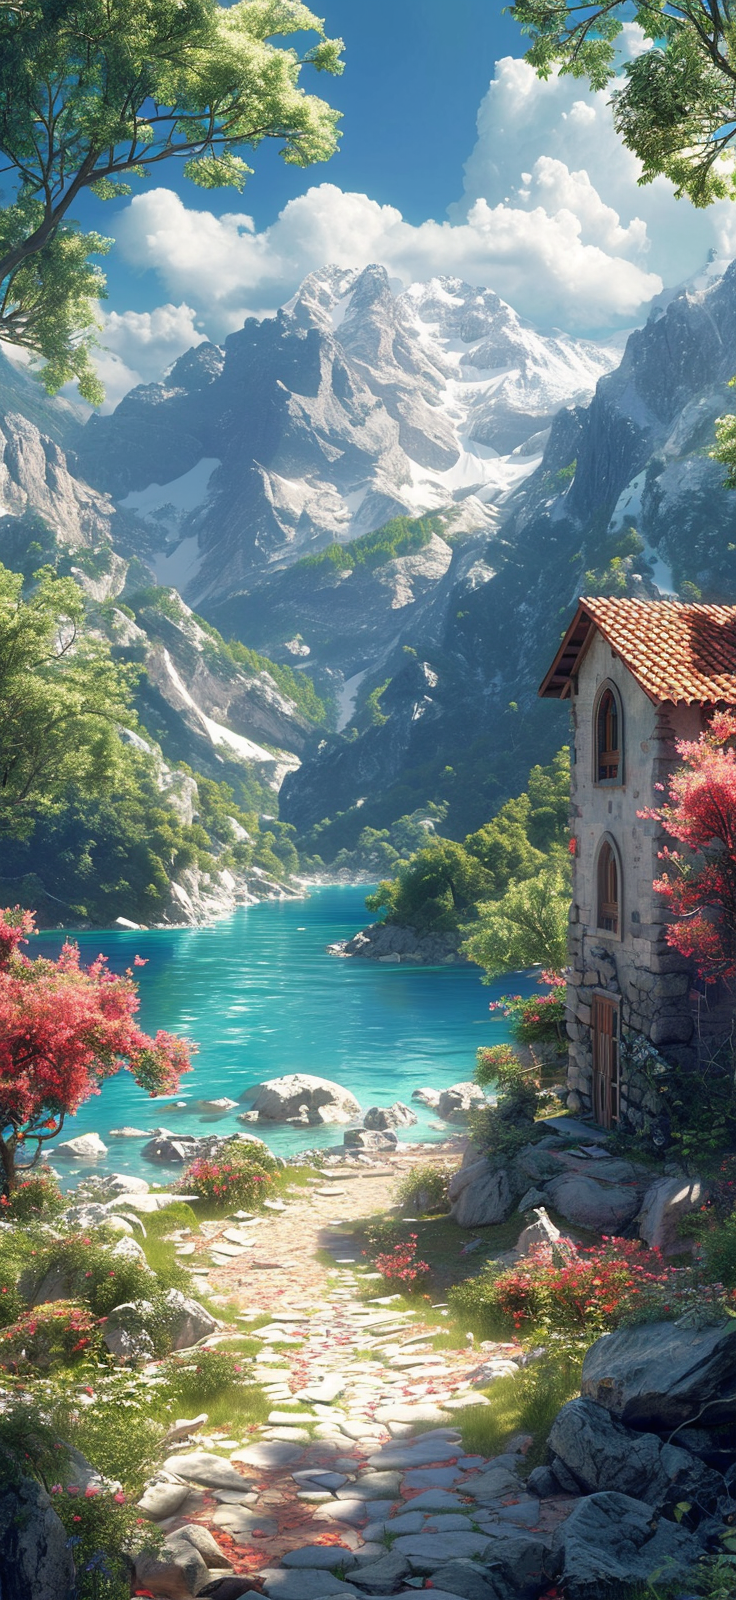 Escape the hustle and bustle with this calming mobile wallpaper featuring a quaint cabin nestled beside a tranquil lake, surrounded by majestic mountains.